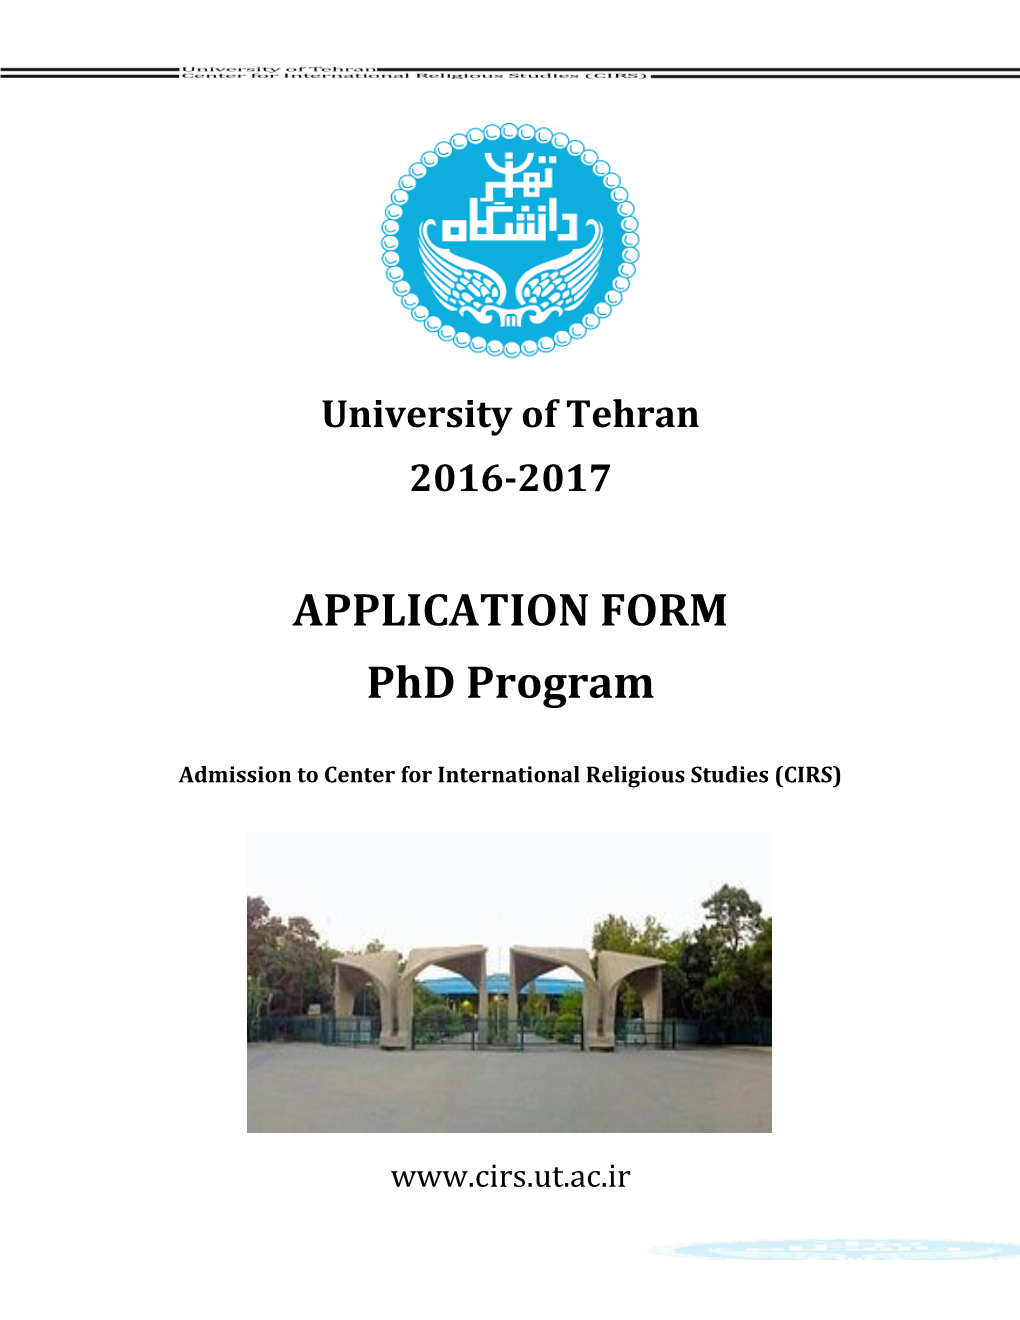 Admission to Center for International Religious Studies (CIRS)